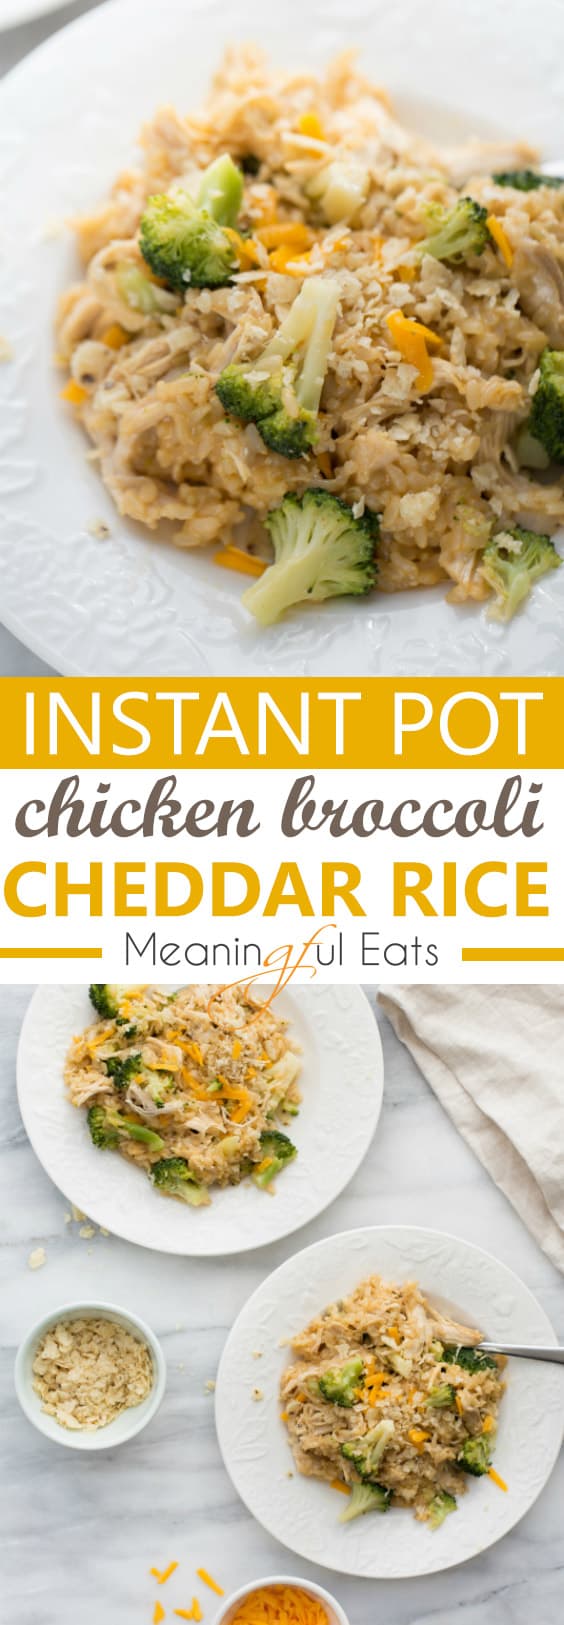 Instant Pot Chicken, Broccoli and Cheddar Rice! #instantpot #instantpotrecipes #instantpotchickenandrice #easyinstantpotrecipes #glutenfreeinstantpot #instantpotdinner #glutenfreedinner #glutenfree